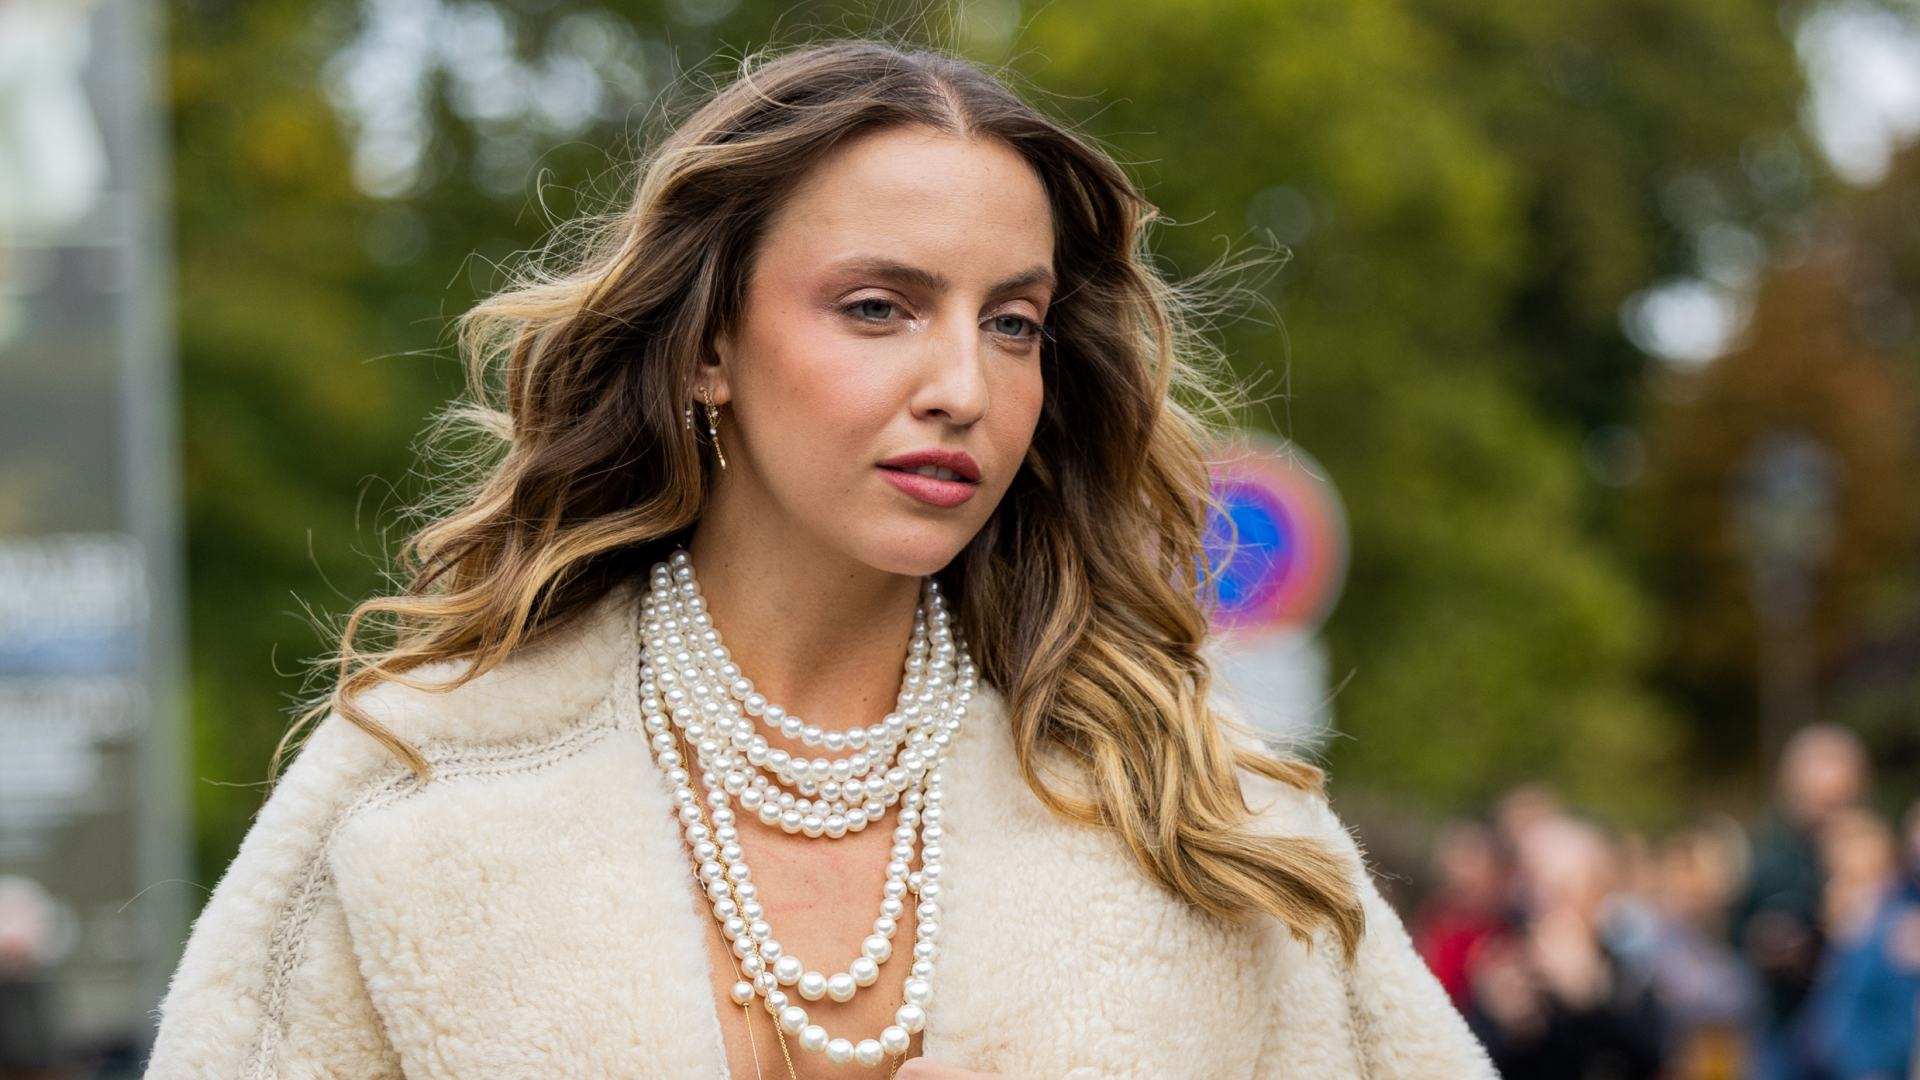 The Pearl Trend Is Back for 2023—Here's How to Wear Yours